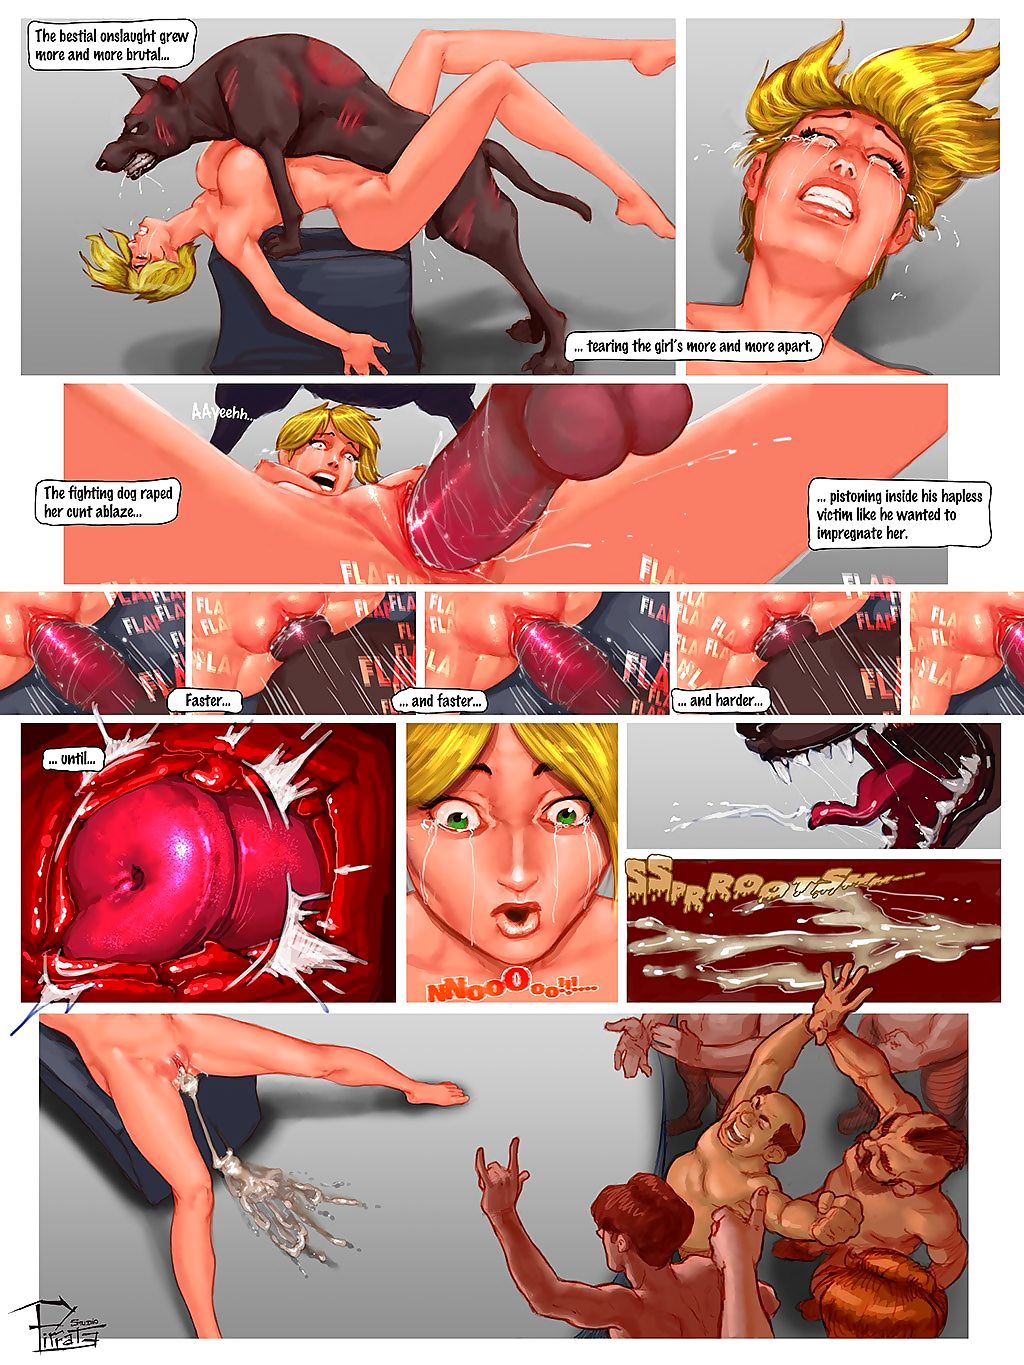 superheroine trong nguy hiểm hãng phim pirrate page 1